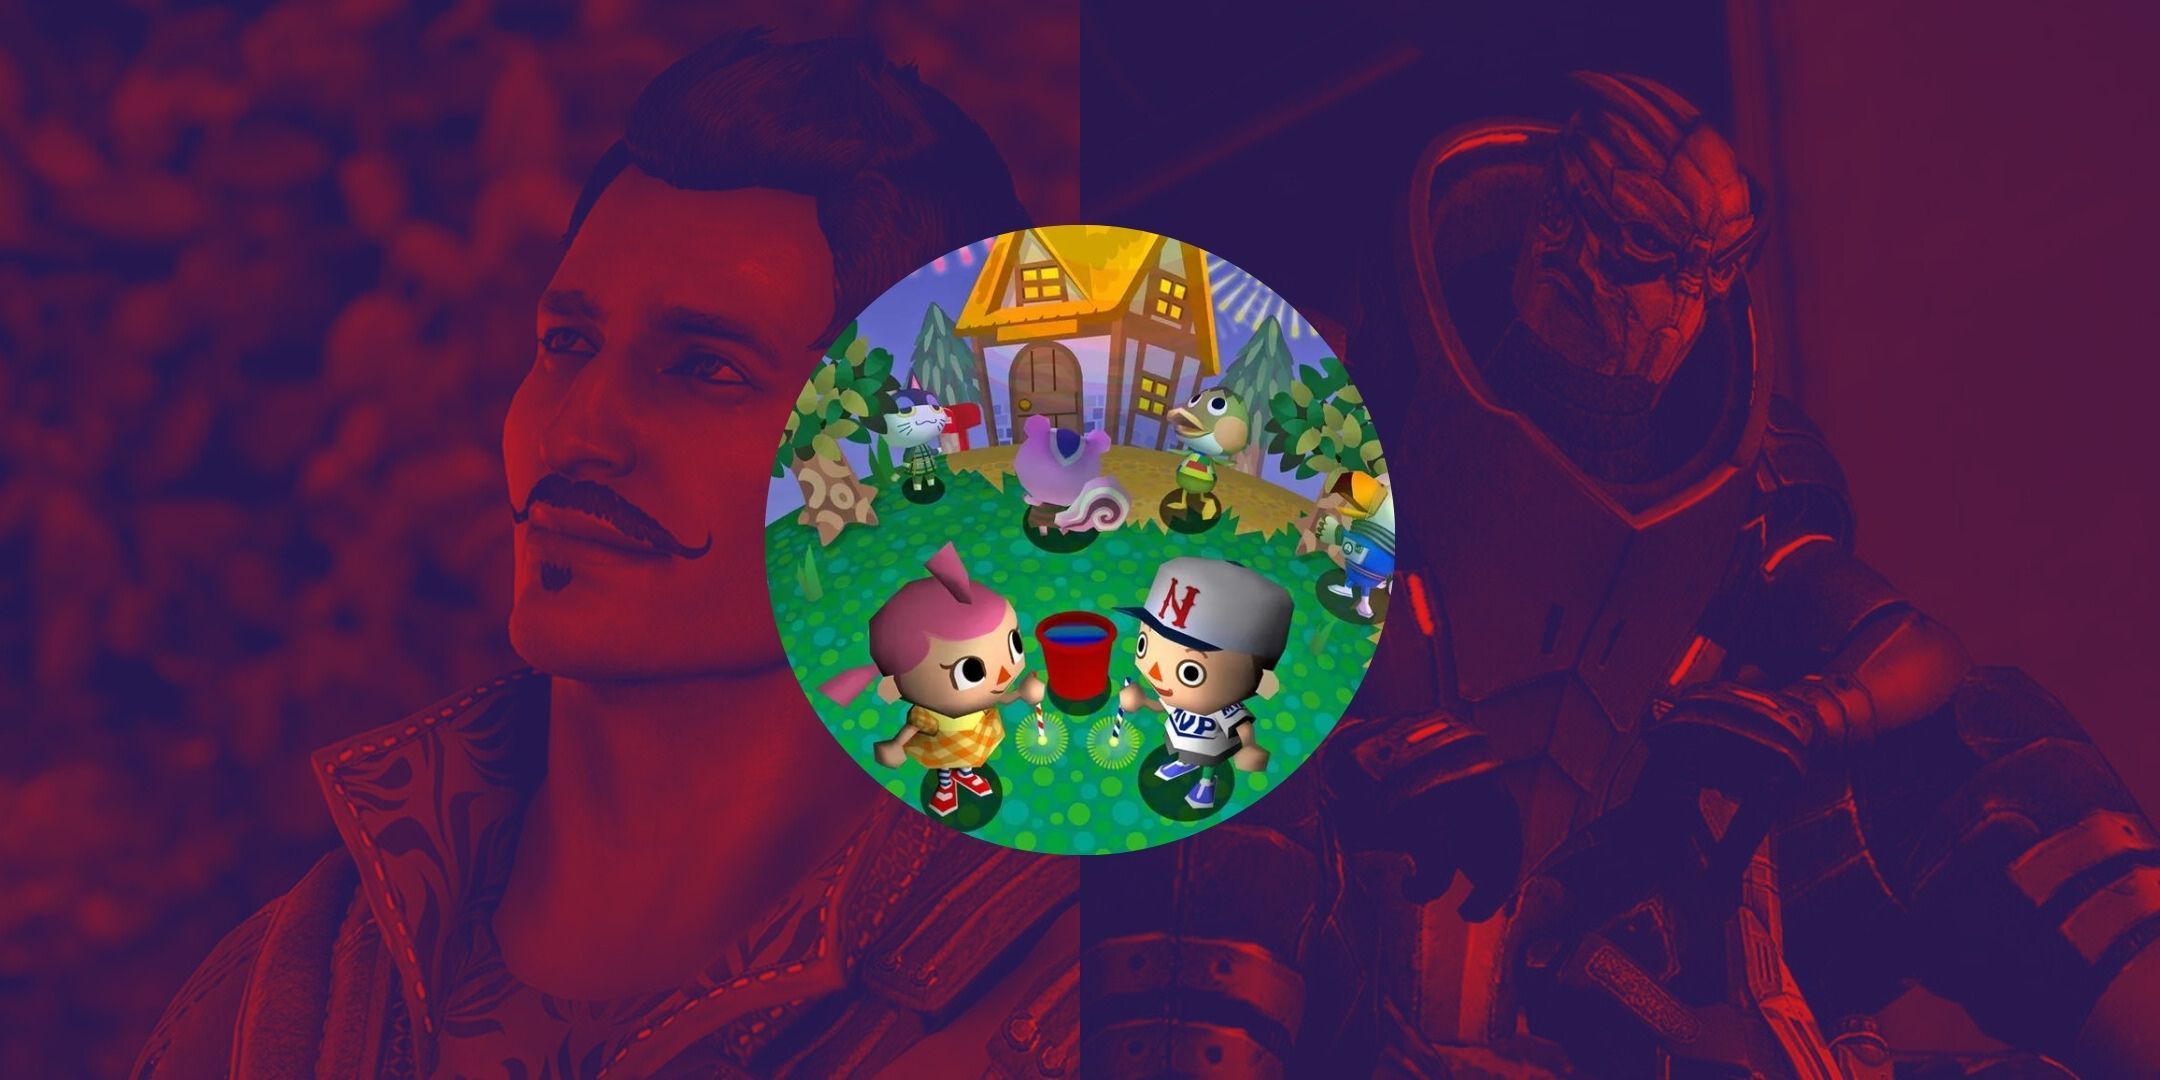 Games Where You Can Lose Characters Featured Image containing Dorian and Garrus in the background with a red filter over them. In the front is a promo image of the original Animal Crossing game inside a circle